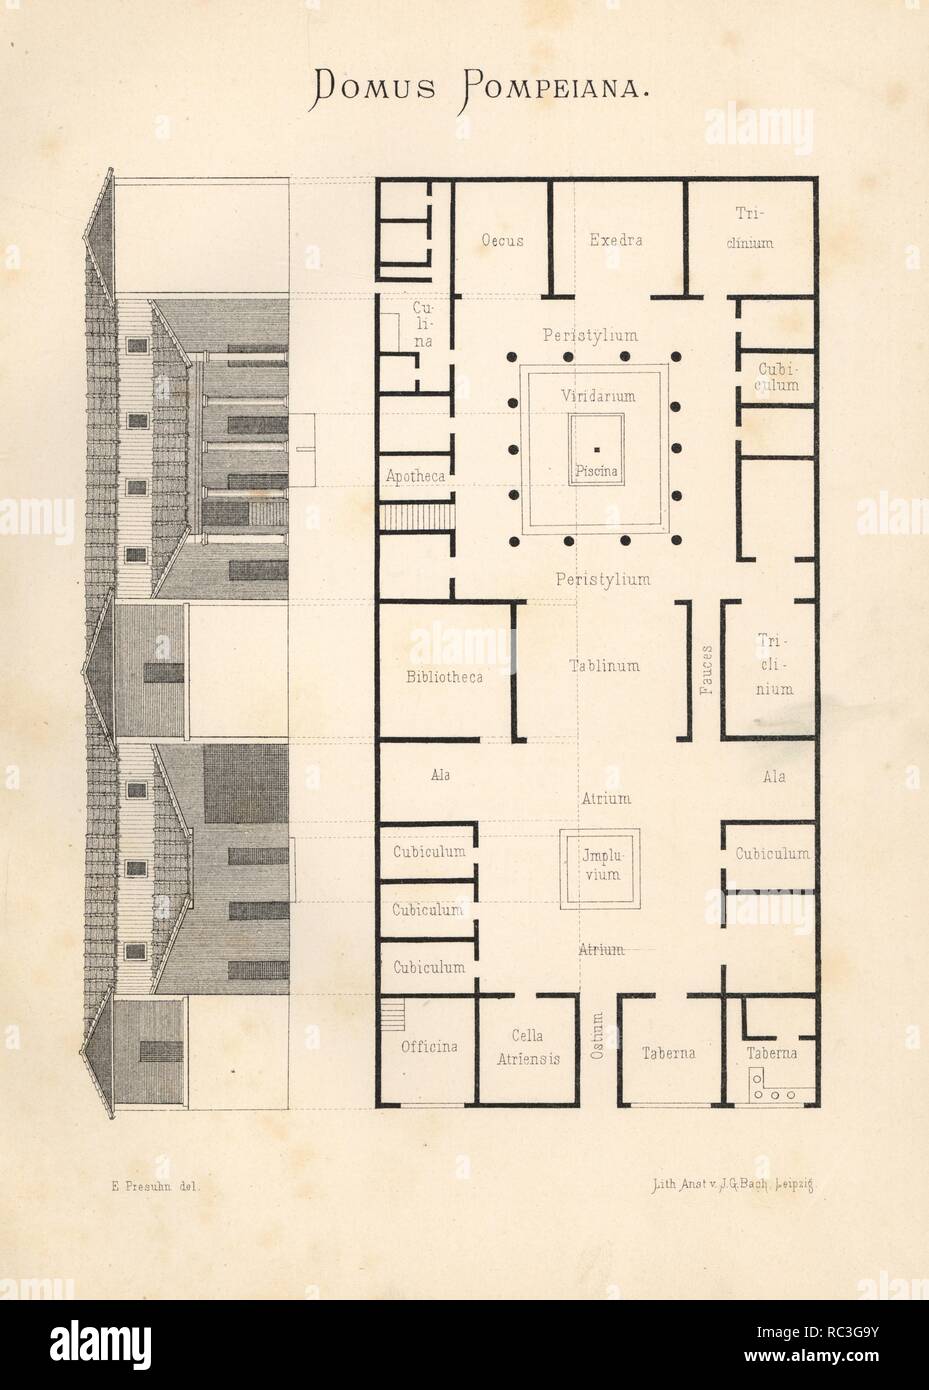 Domus Pompeiana: floor plan and elevation of a luxurious house in Pompeii. Drawn by Presuhn and lithographed by J. G. Bach from Emil Presuhn's 'Pompeji. Die Neuesten Ausgrabungen von 1874-1881,' Weigel, Leipzig, 1882. German archeologist Presuhn (1844-1881) lived in Italy for eight years and, with Mr. Discanno and Miss Amy Butts, made exact copies of many wall paintings that are now lost. Stock Photo